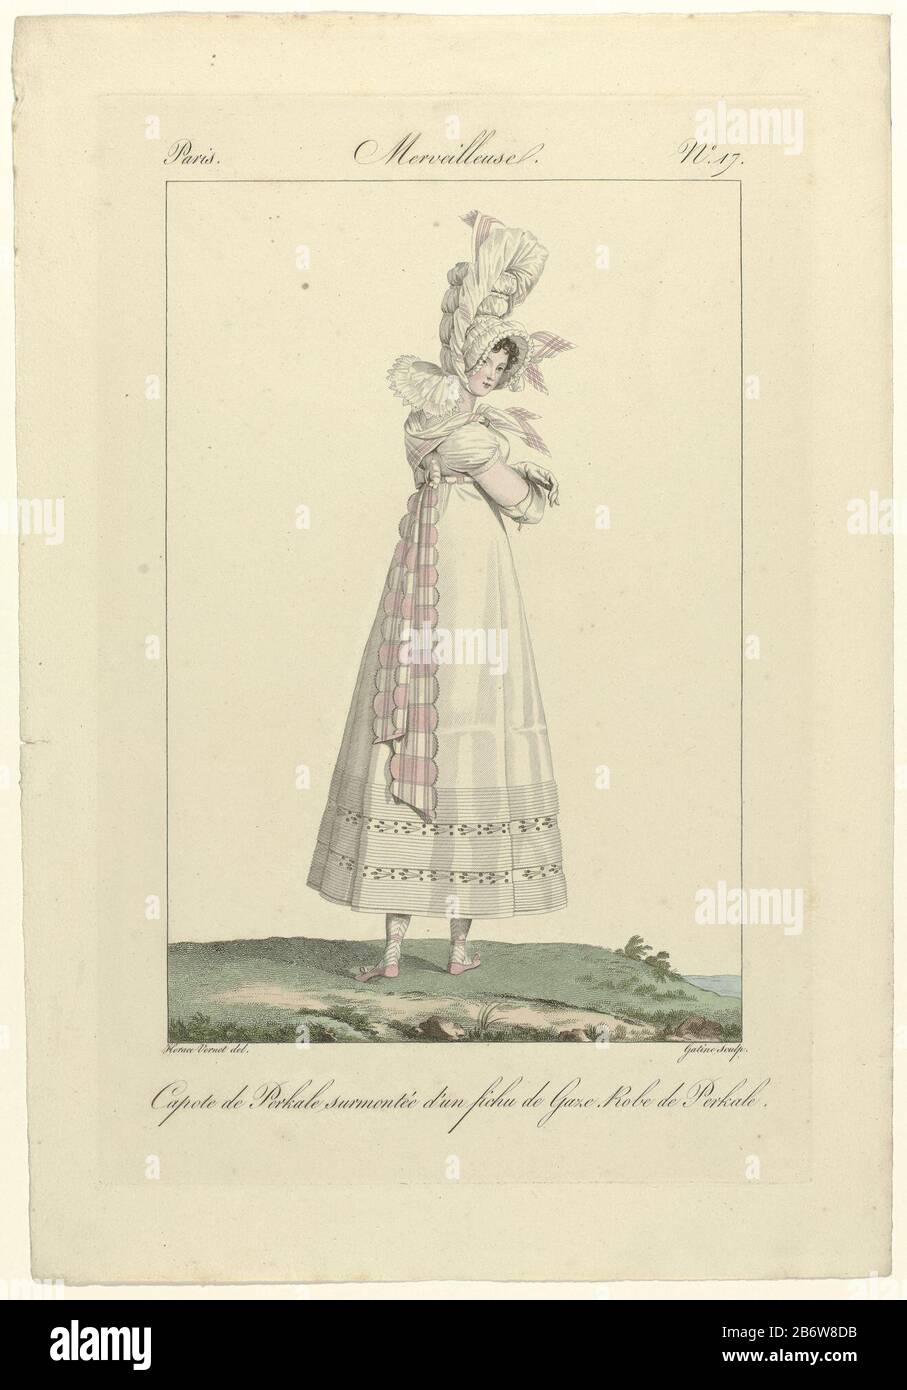 Incroyables et Merveilleuses, 1813, Merveilleuse, No 17 Capote de Perkal ()  'Merveilleuse', seen from the back, ha on its head a 'capote' cotton  percale (percale), Where: around it is attached, form a